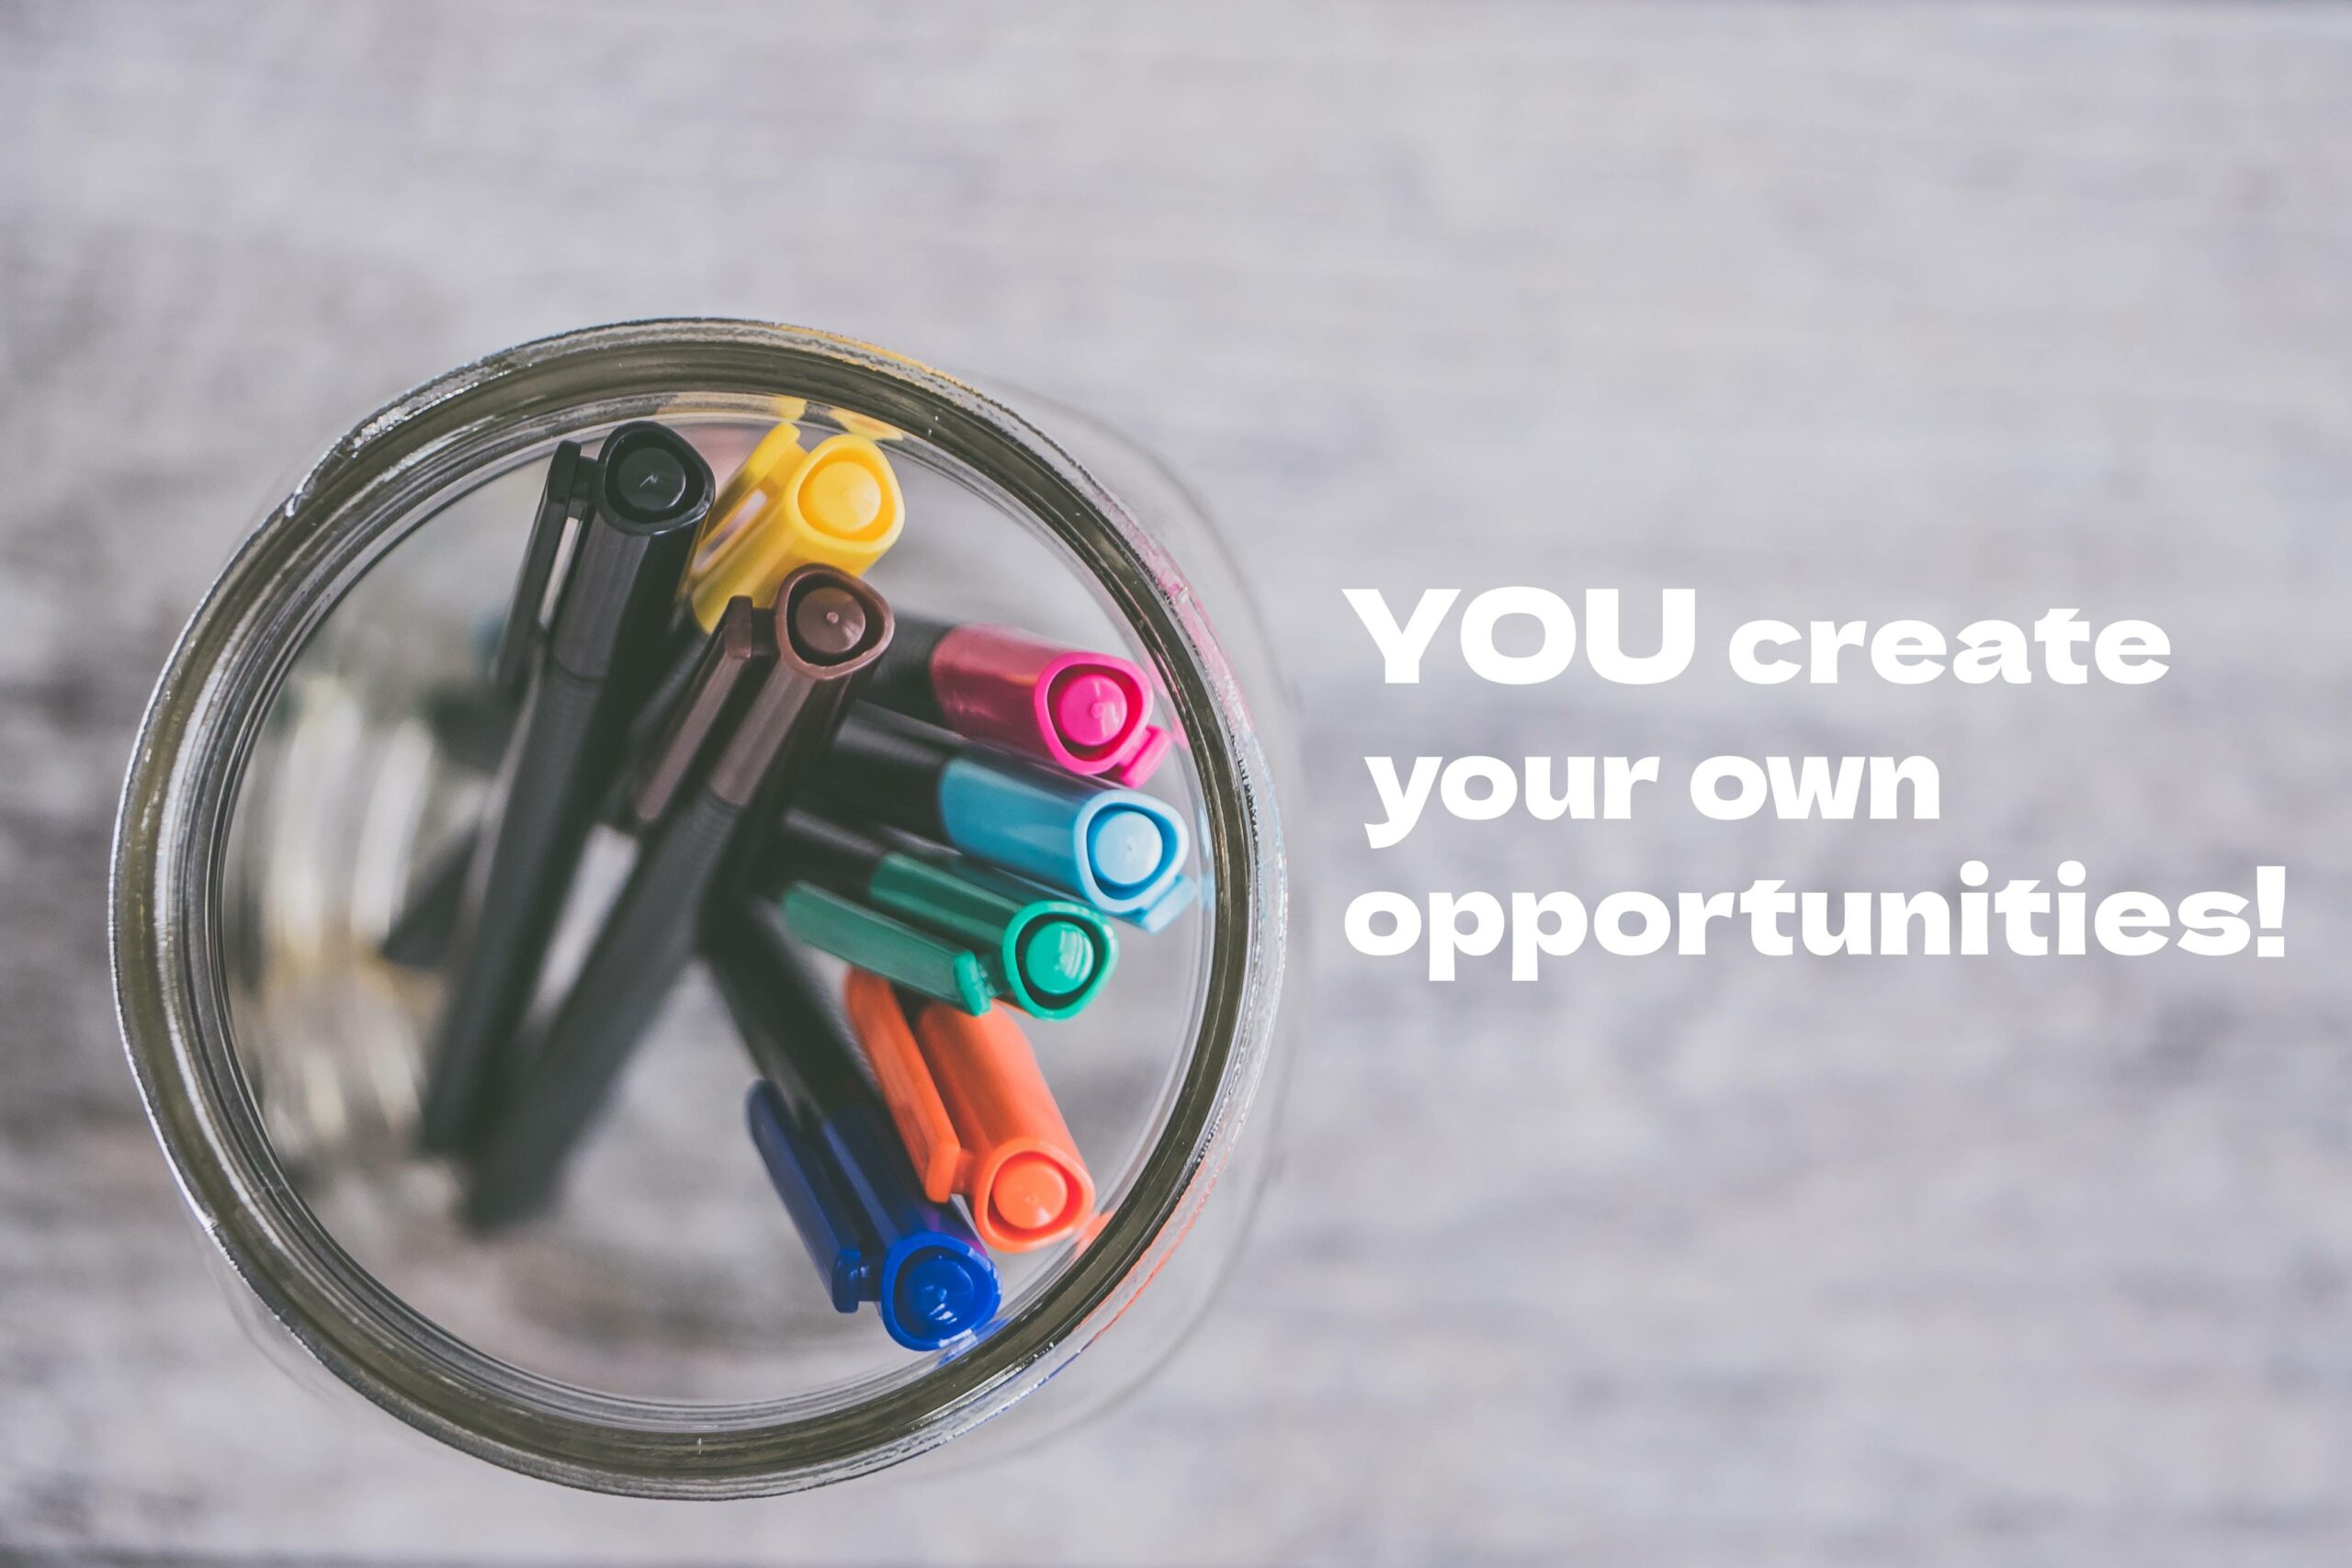 CREATE YOUR OWN OPPORTUNITIES! | AERO HighProfessionals